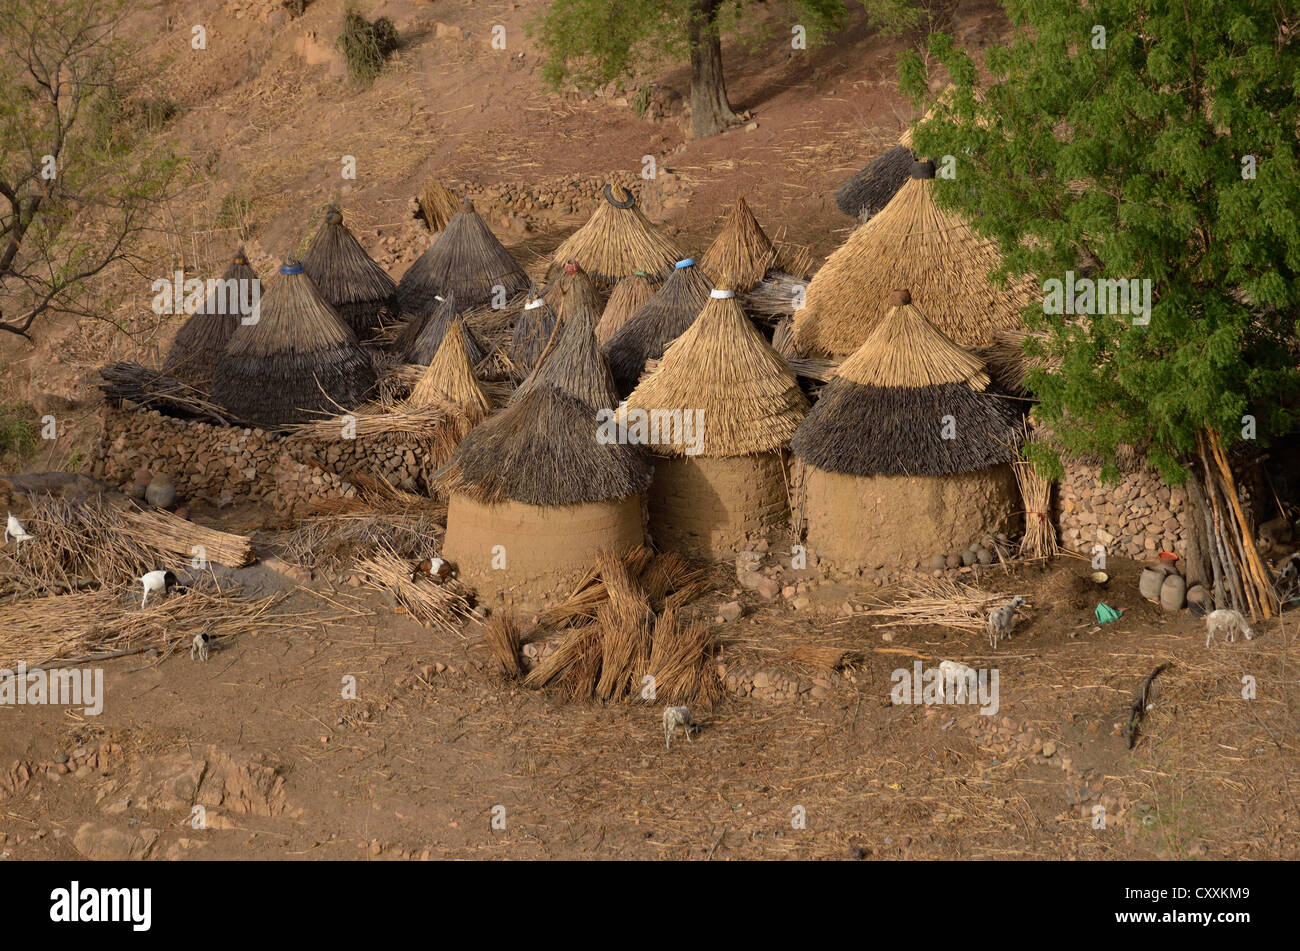 Village with typically thatched rondavels in the Mandara Mountains, Cameroon, Central Africa, Africa Stock Photo